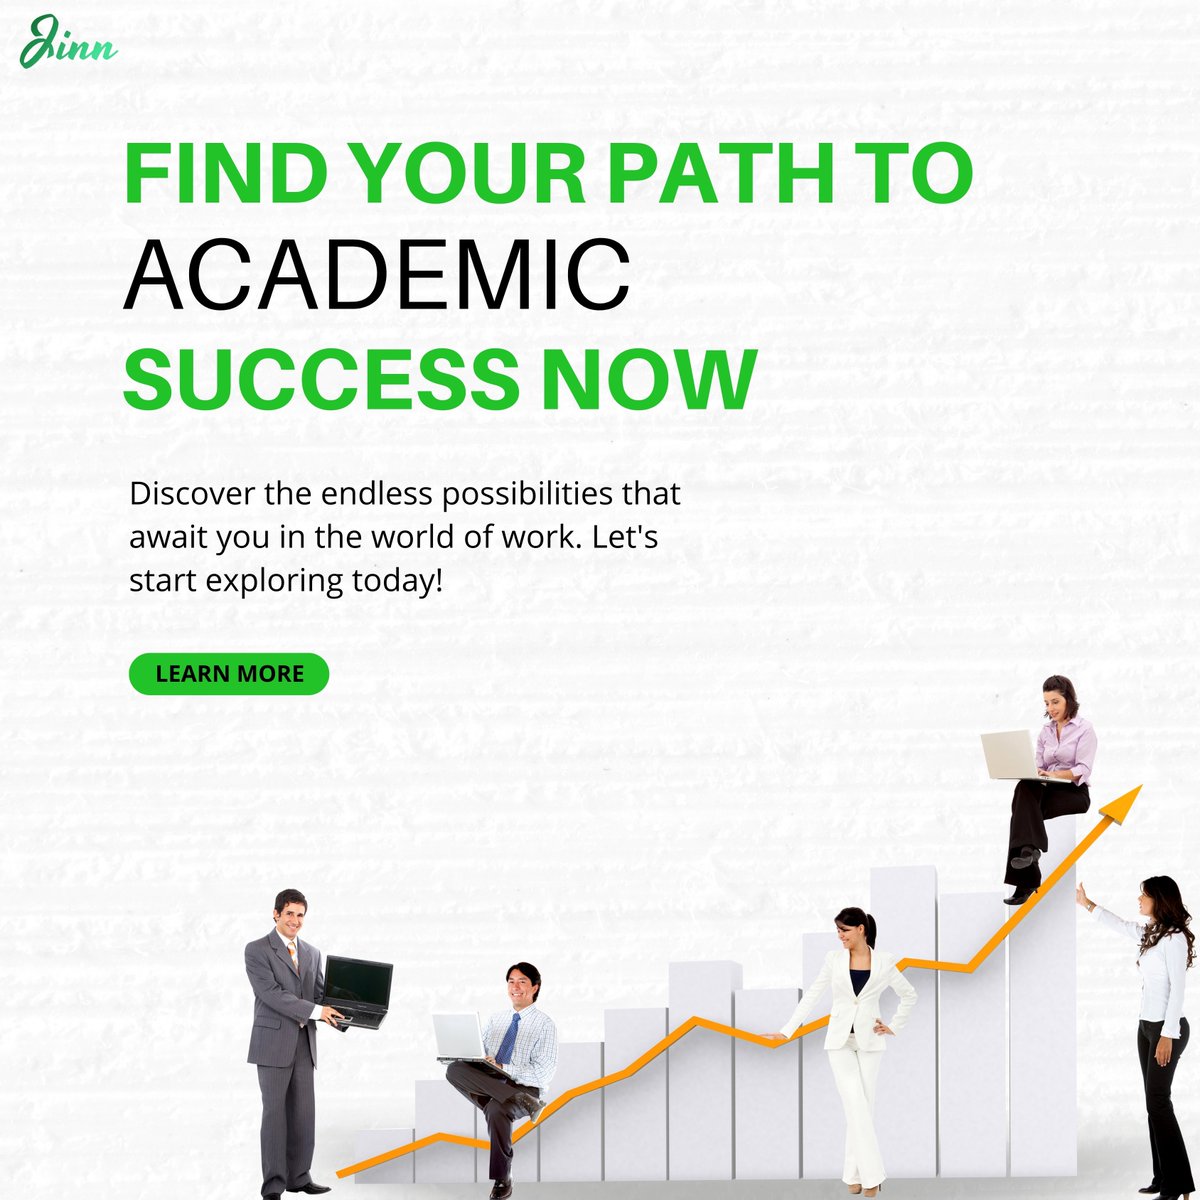 Your path to academic success begins with a single step – take it now and pave the way for a brighter future.

Jinn.careers

#jinncareers #career #networking #cv #resume #resumetips #networkingjobs #jobvacancy #jobopportunity #networkmarketing #jobshiring #jobsearch